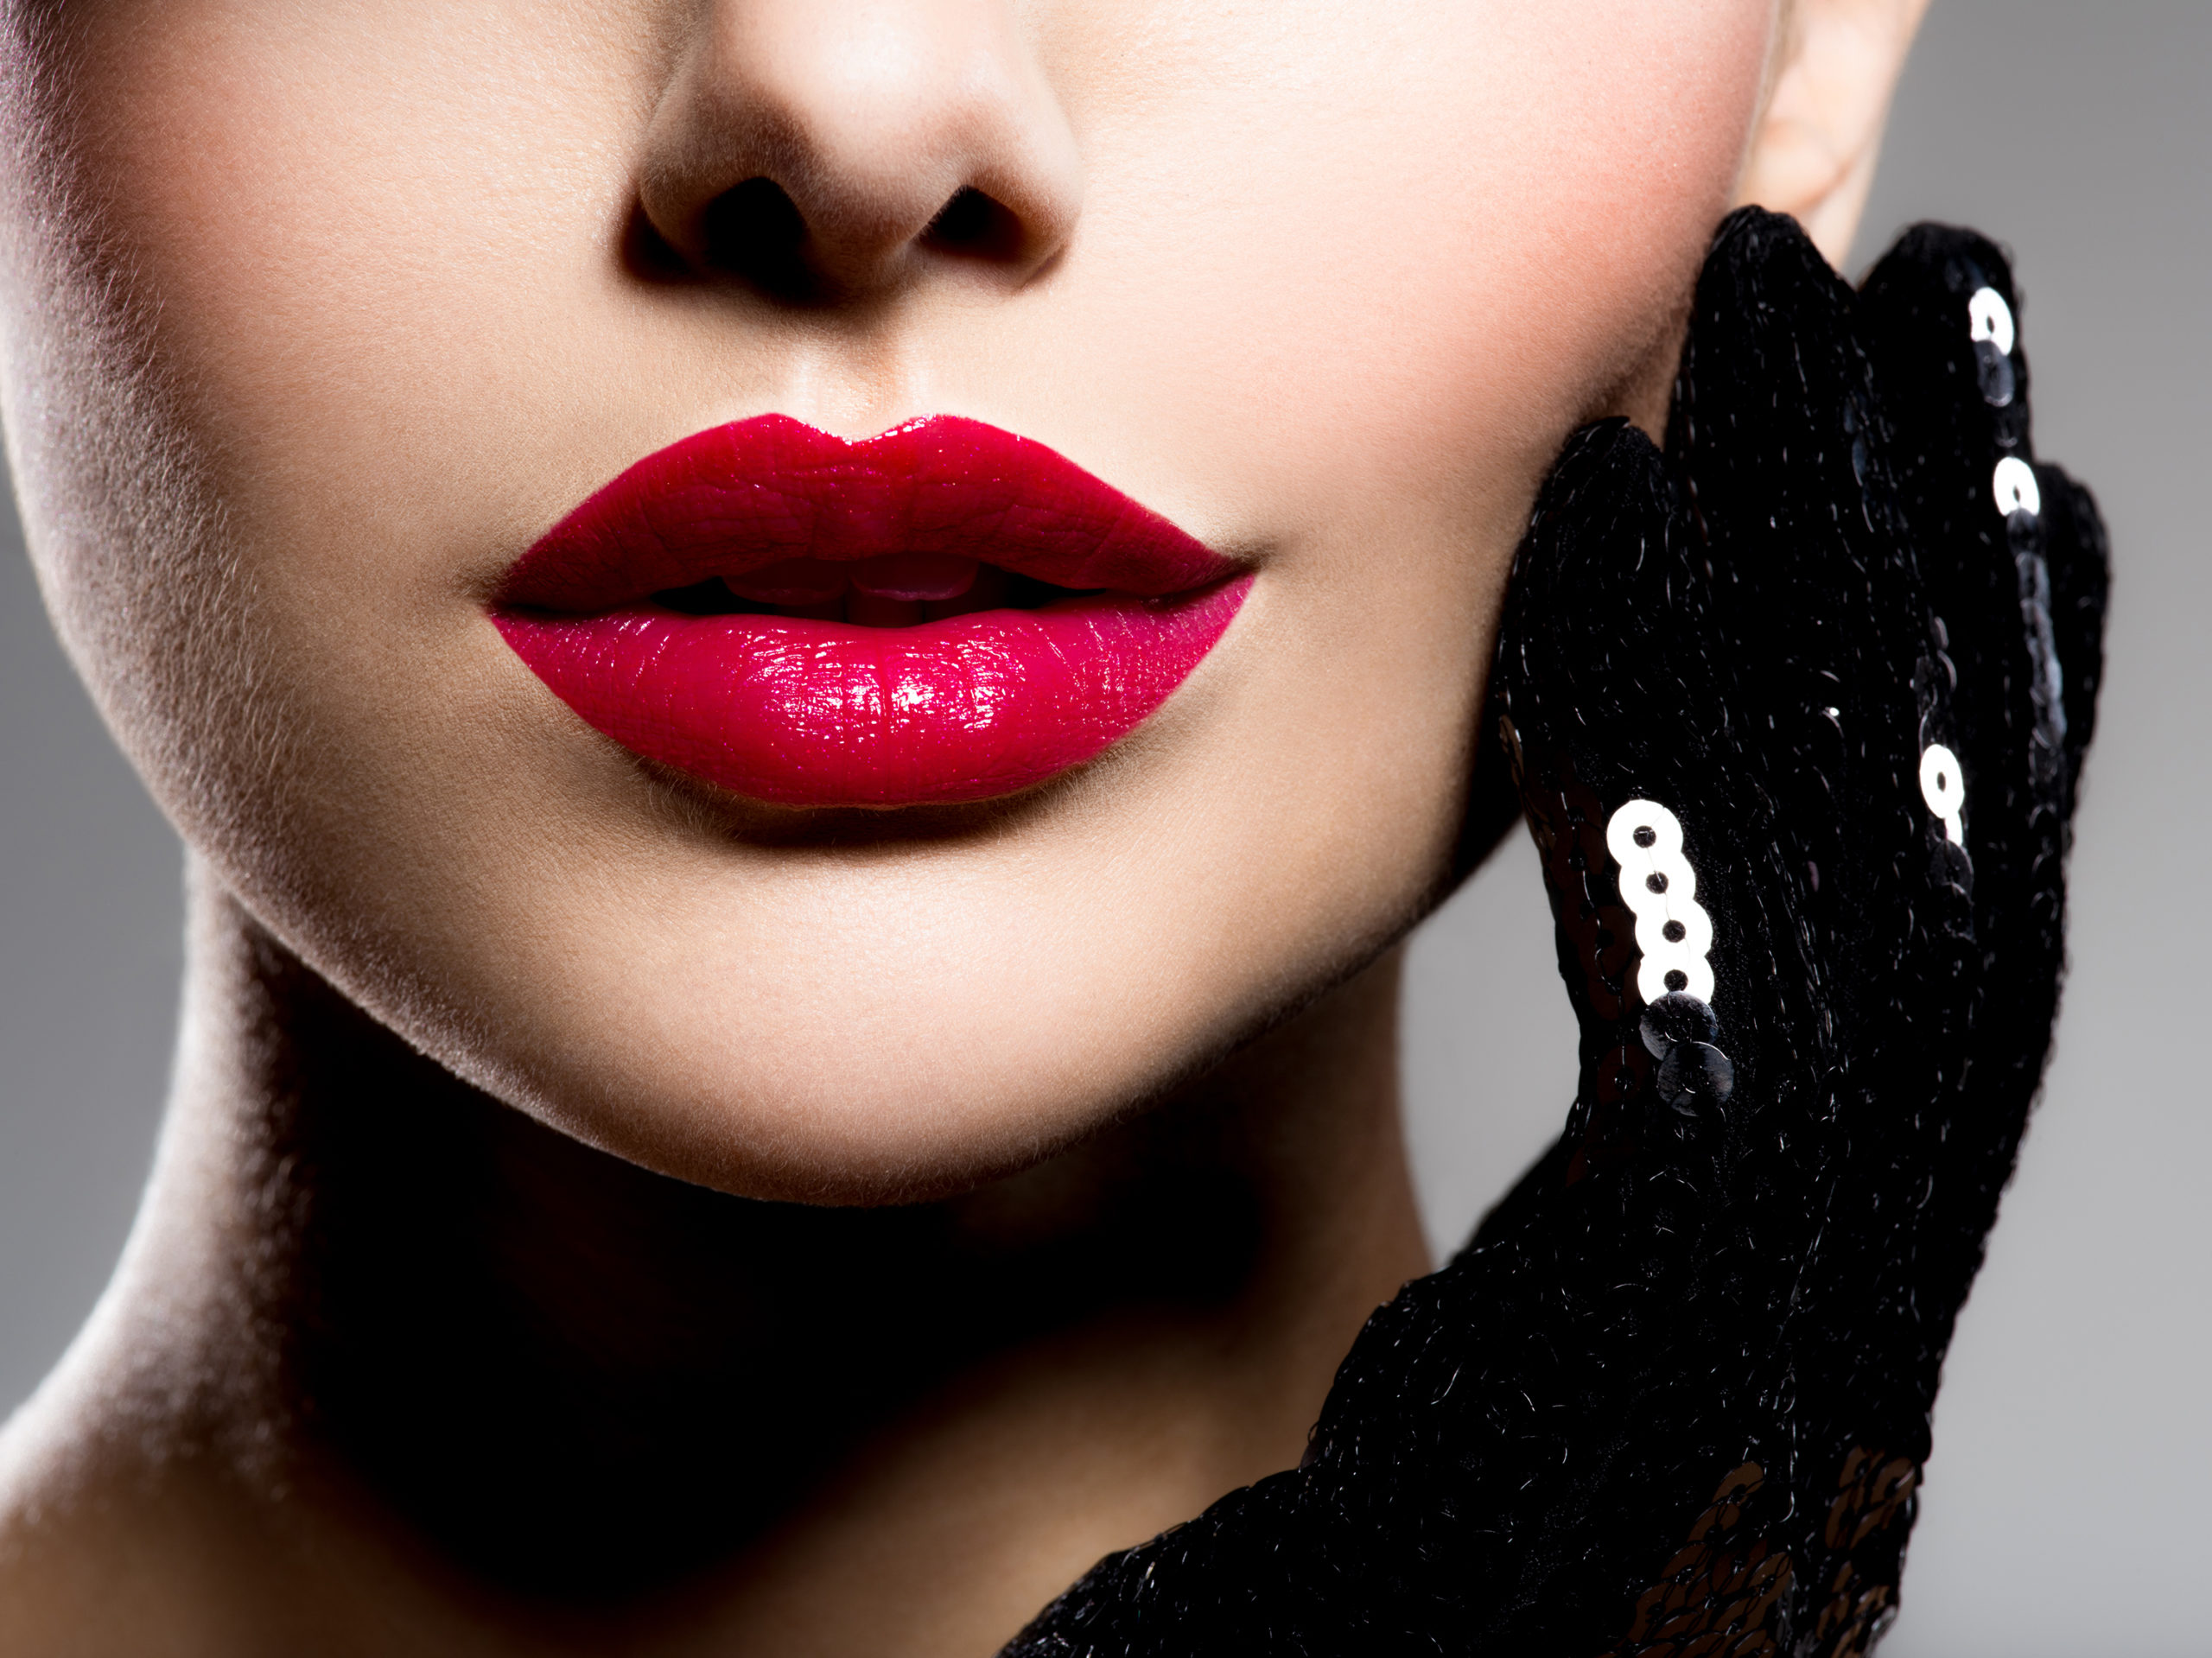 //www.secretdiarygirls.com/wp-content/uploads/2022/02/lose-up-women-s-lips-with-red-lipstick-black-gloves-cheek-scaled.jpg